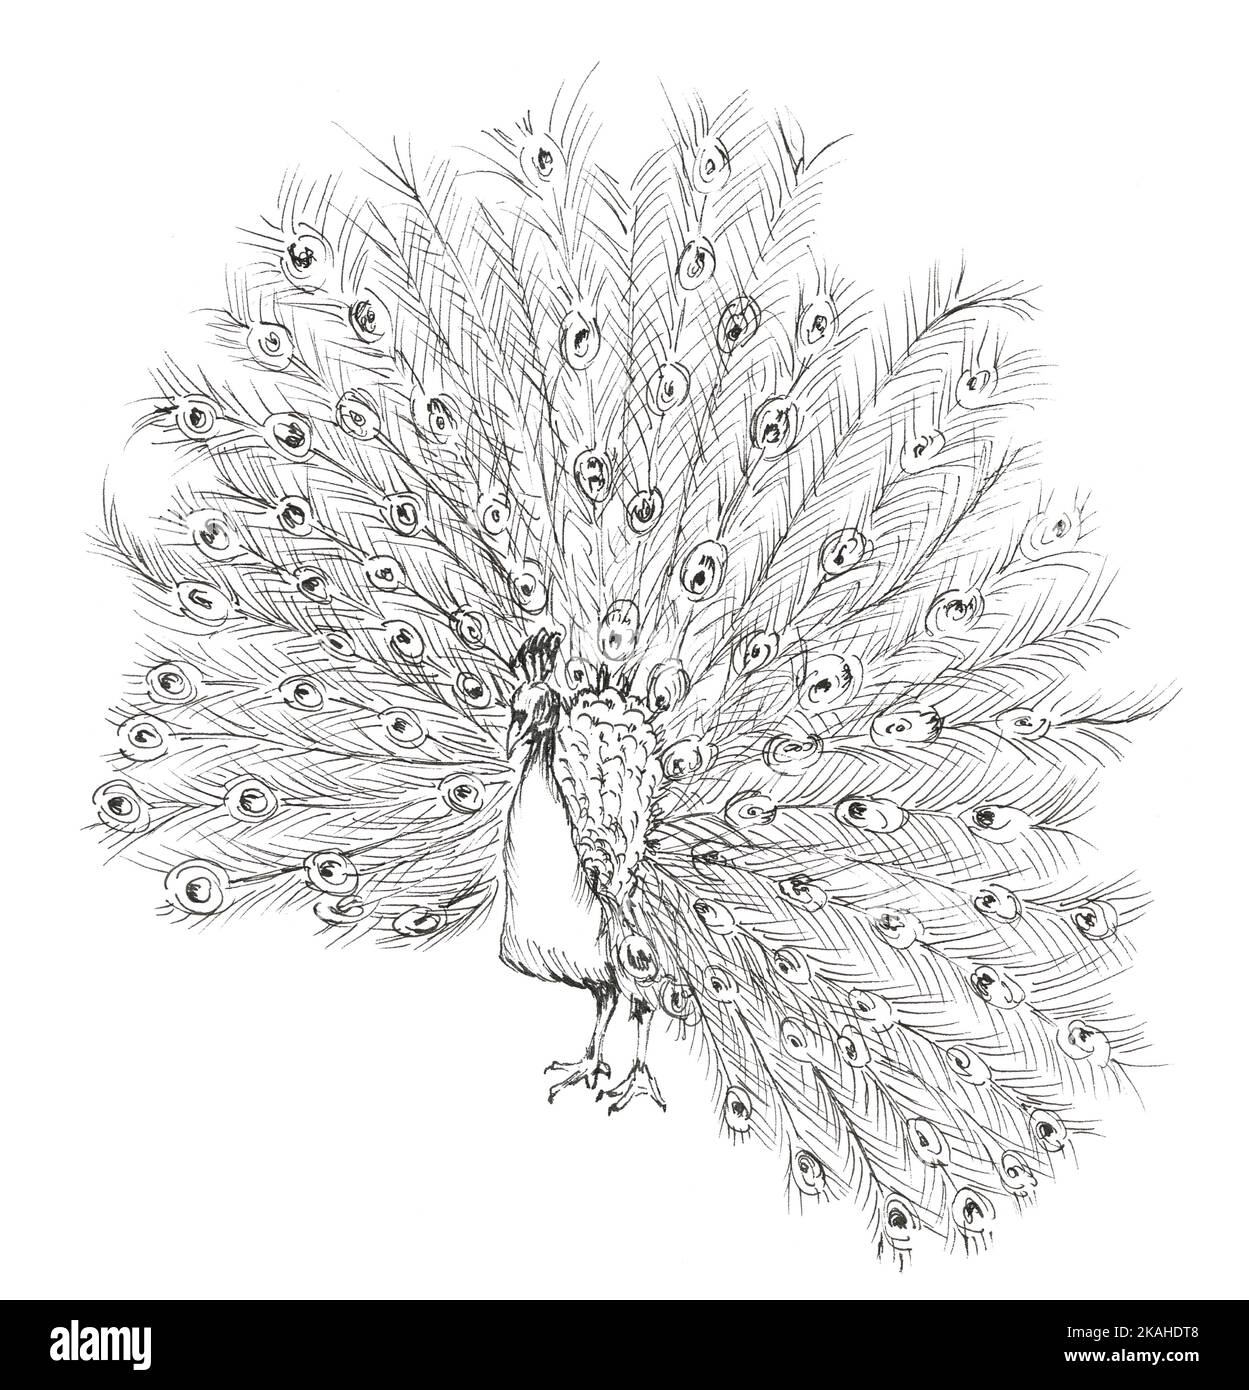 Hand drawn illustration of a peacock displaying its plumage. Ink drawing. Stock Photo